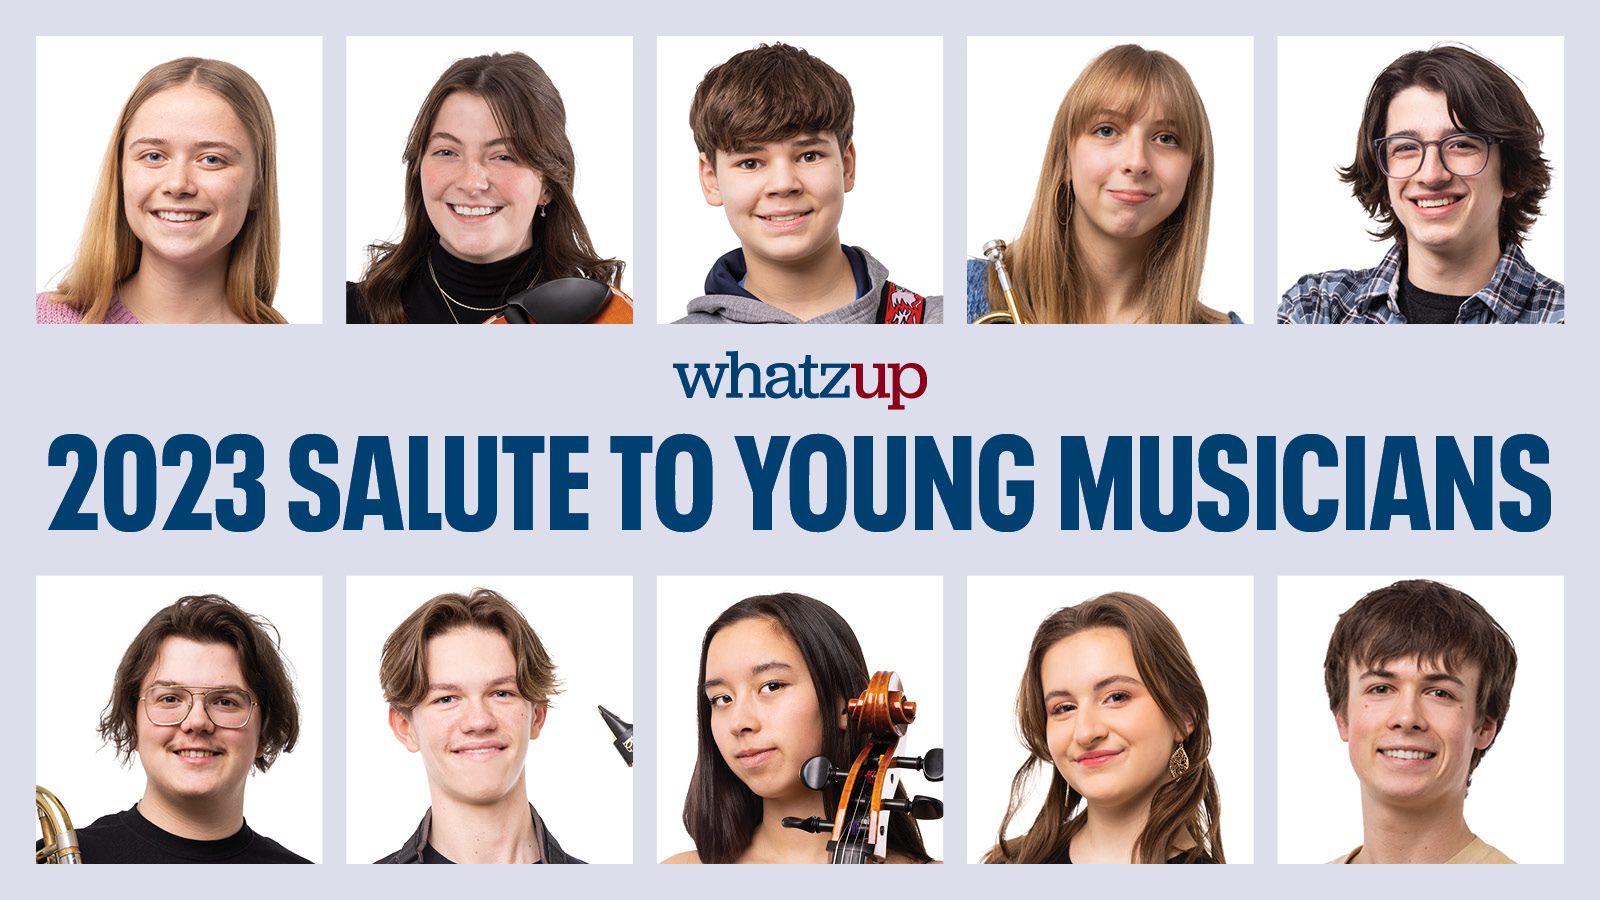 Whatzup 2023 Salute to Young Musicians